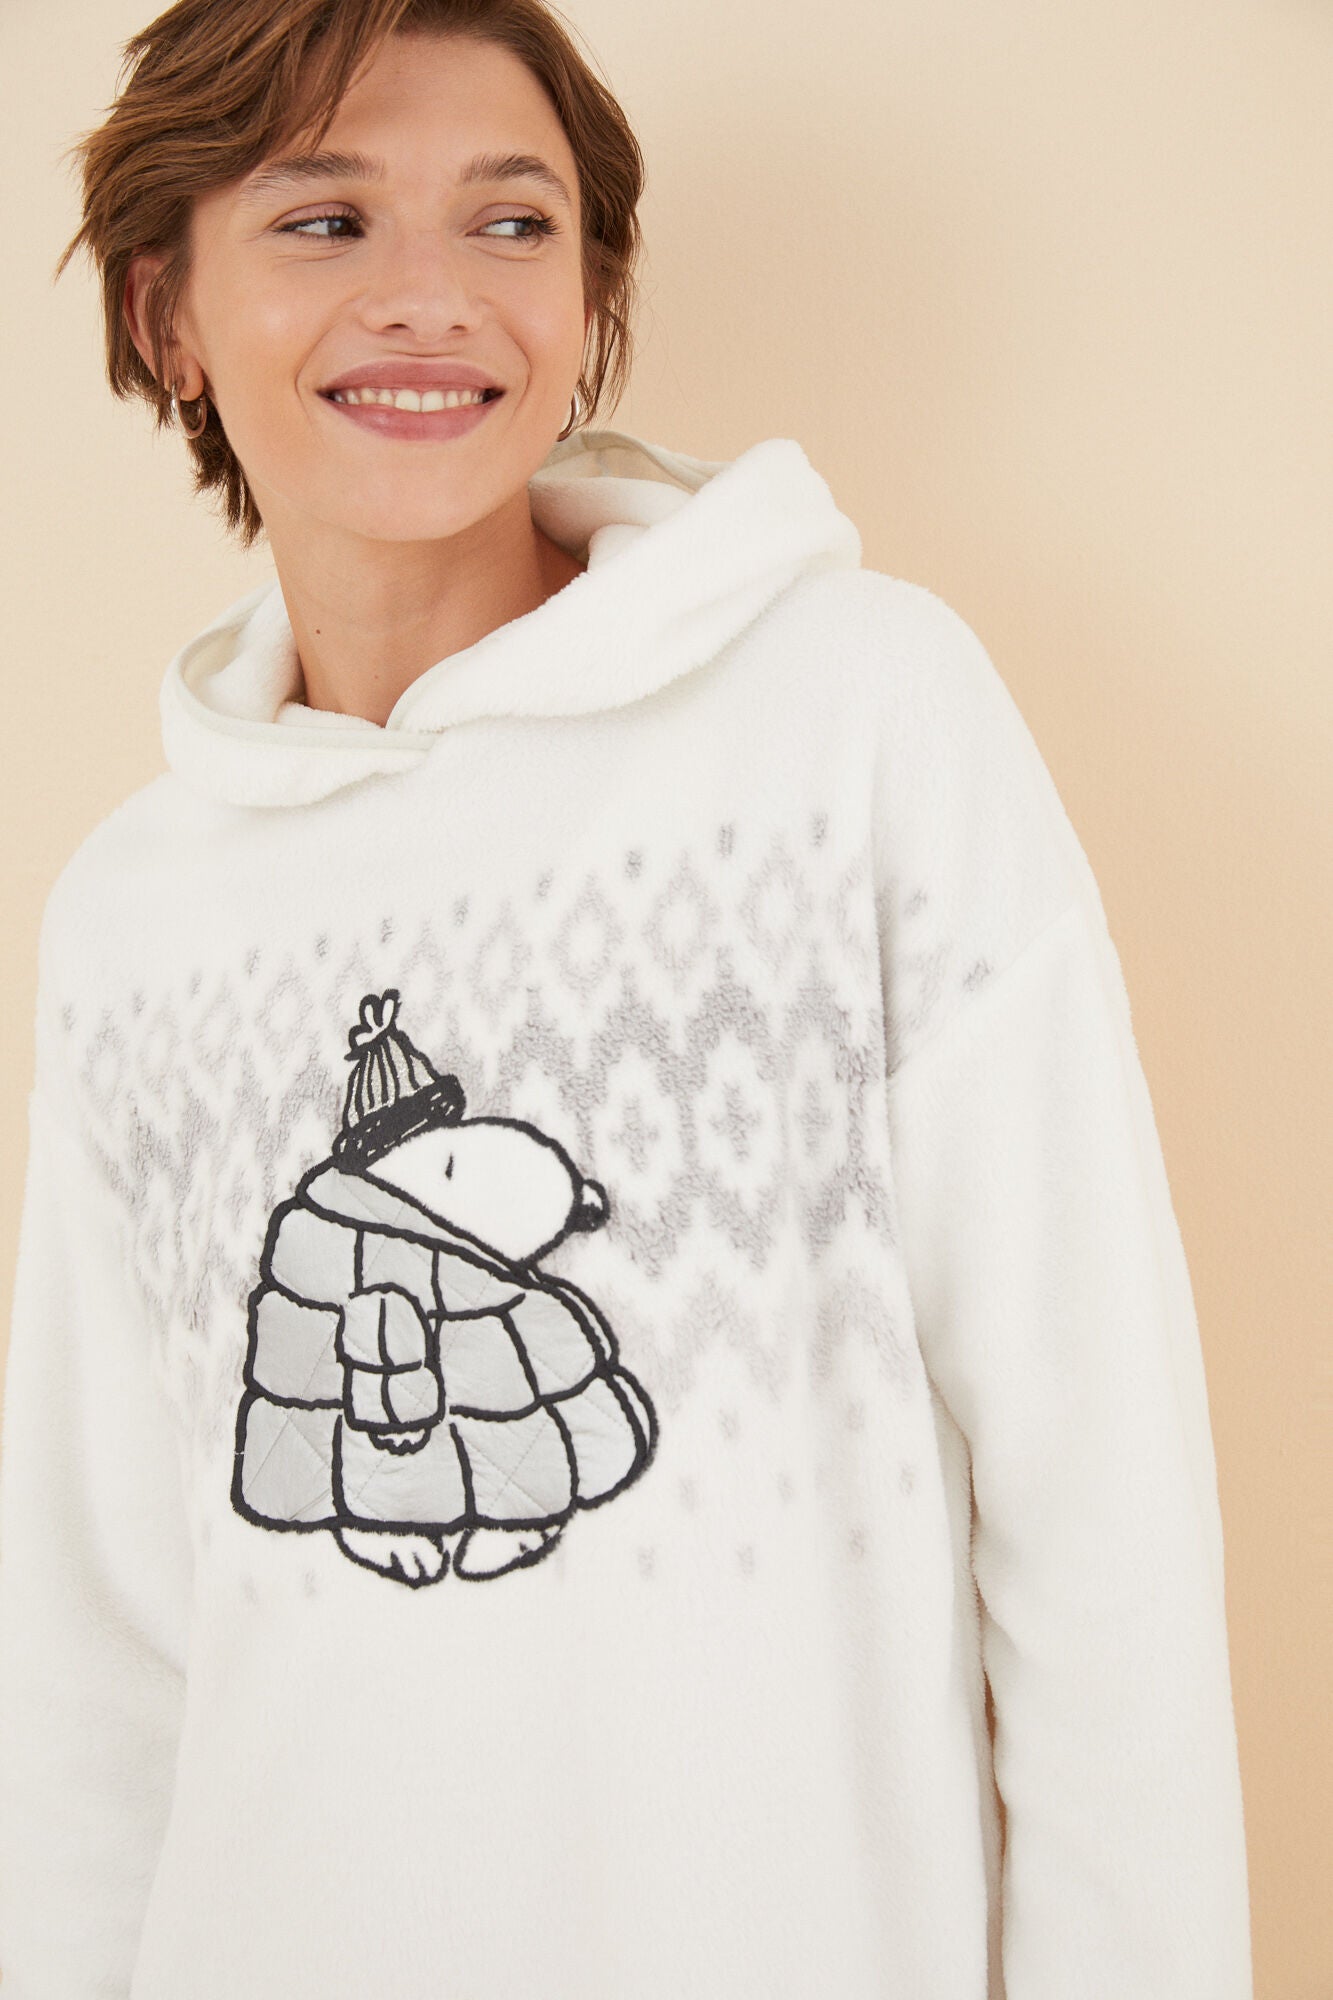 Snoopy nightgown